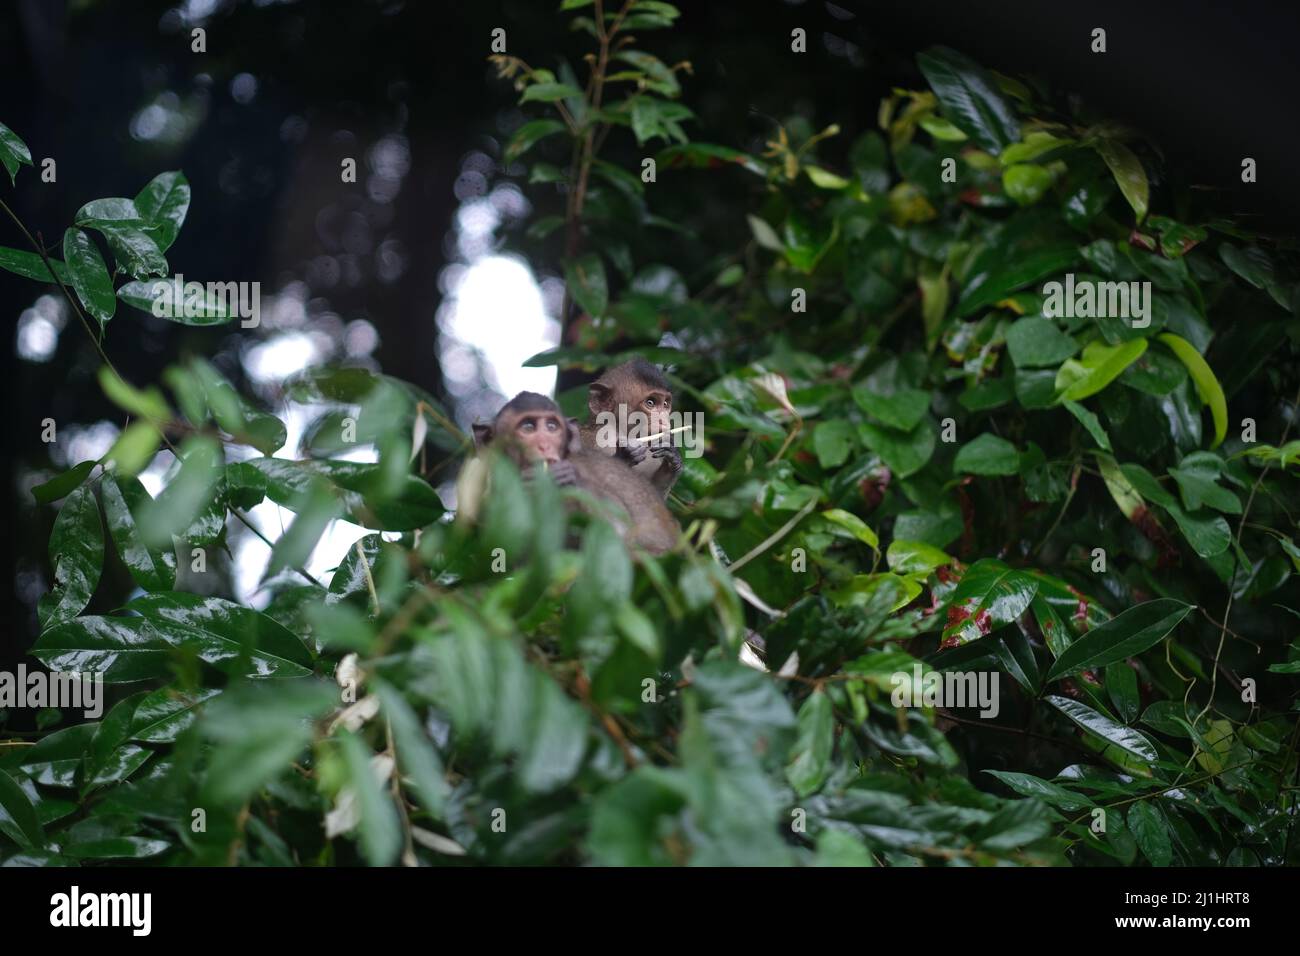 Two younger curious monkeys are hiding in a lush foliage after rain Stock Photo